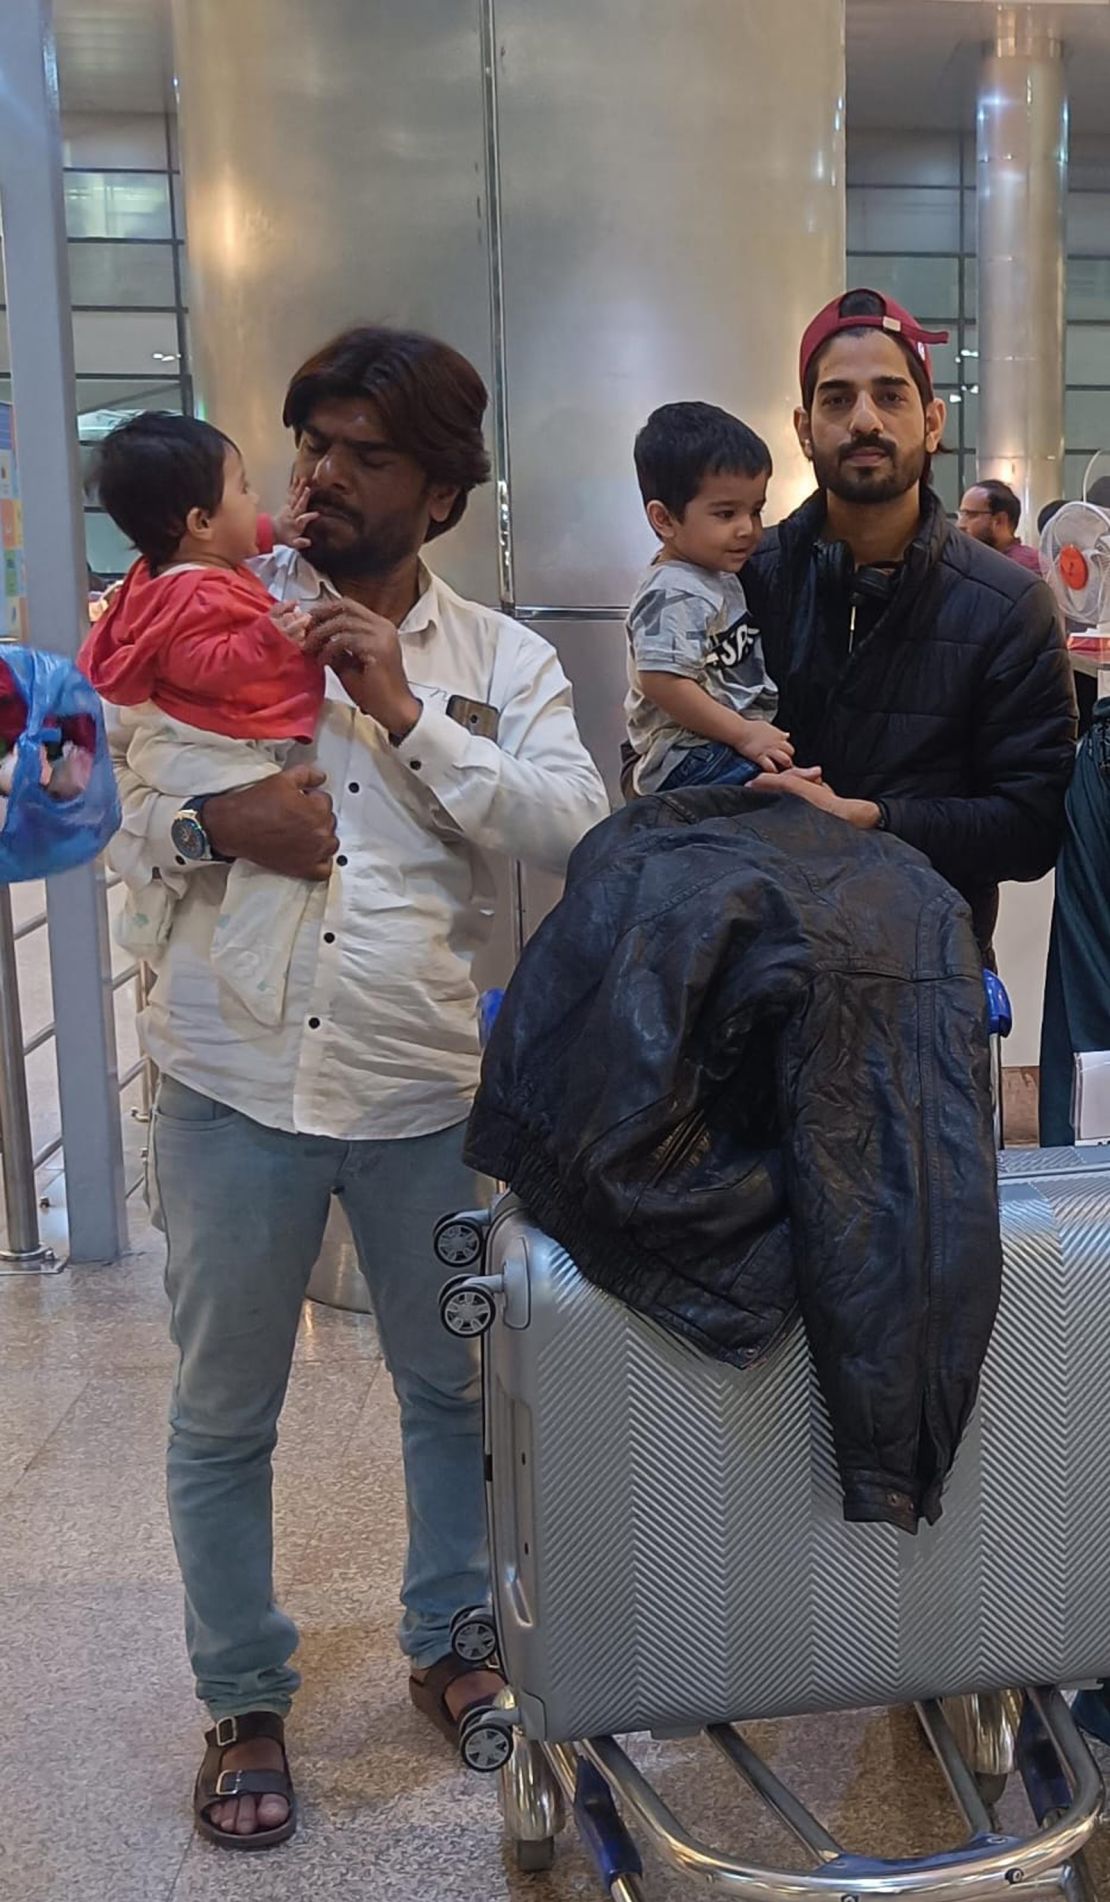 Asfan Mohammed, right, and his brother Imran are pictured with Asfan's children before Asfan left for Russia.